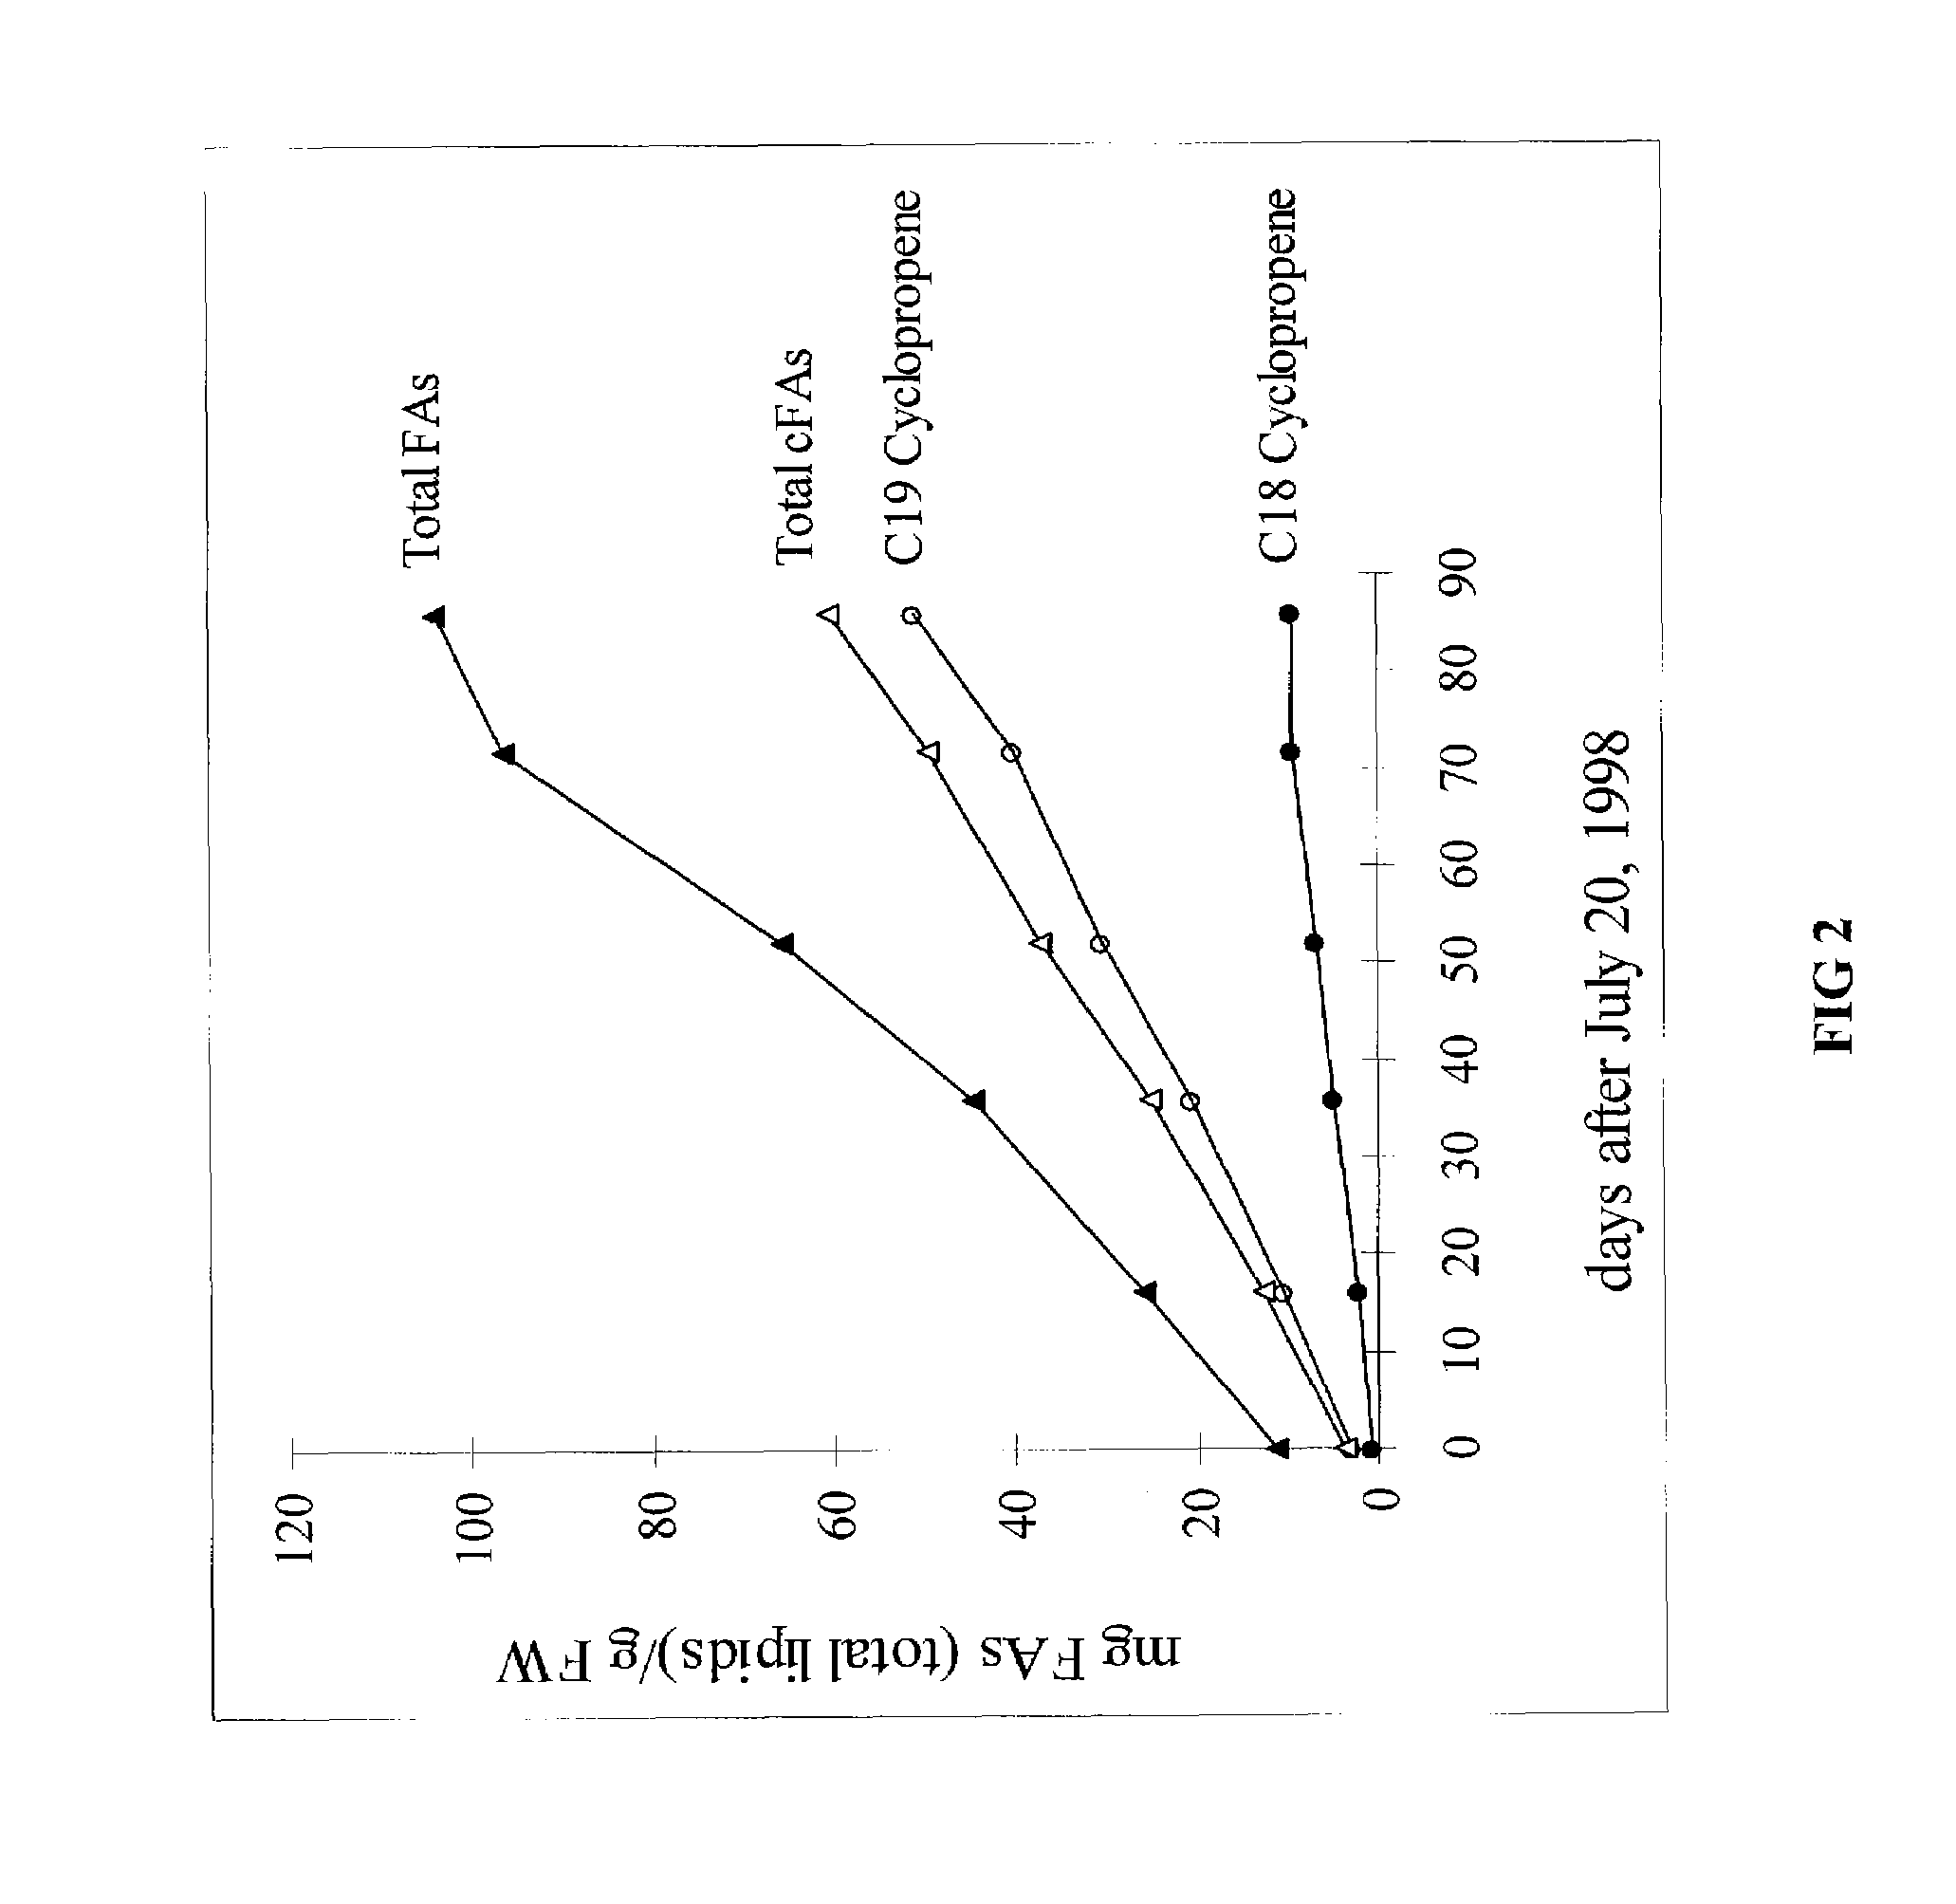 Plant cyclopropane fatty acid synthase genes, proteins, and uses thereof